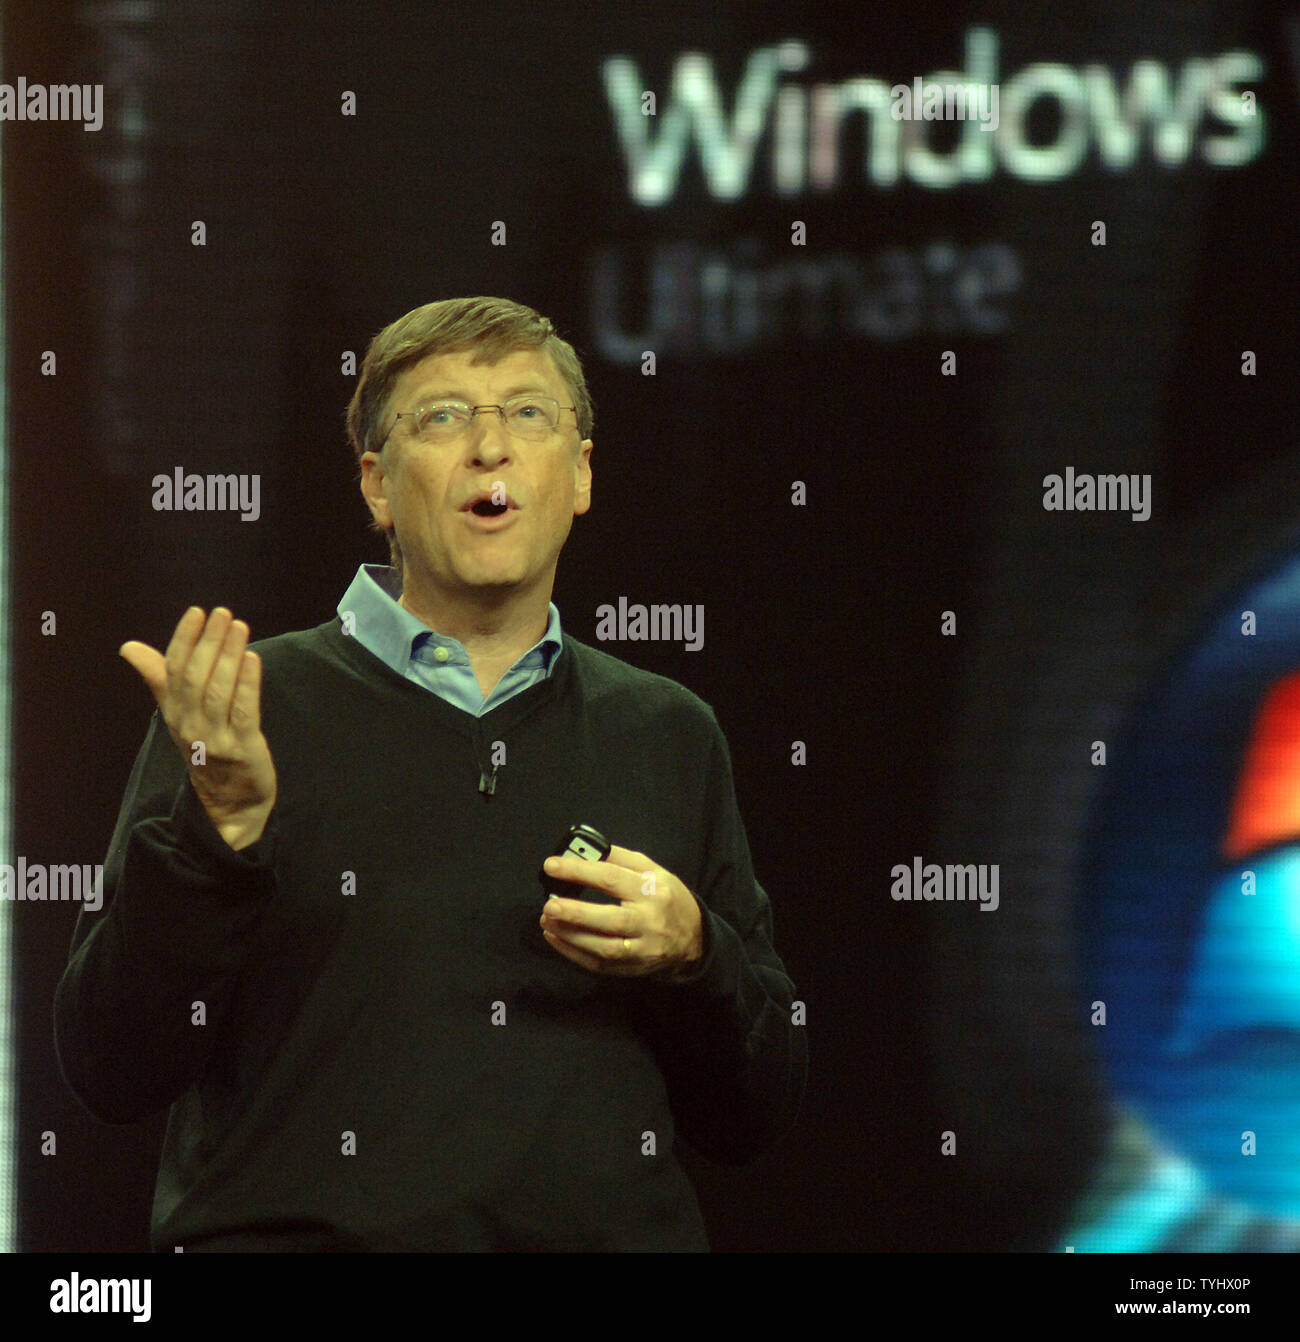 Microsoft CEO Bill Gates outlines the features for the new Microsoft Windows Vista and Windows Office during its media launch in New York City on January 29, 2007.  (UPI Photo/Ezio Petersen) Stock Photo